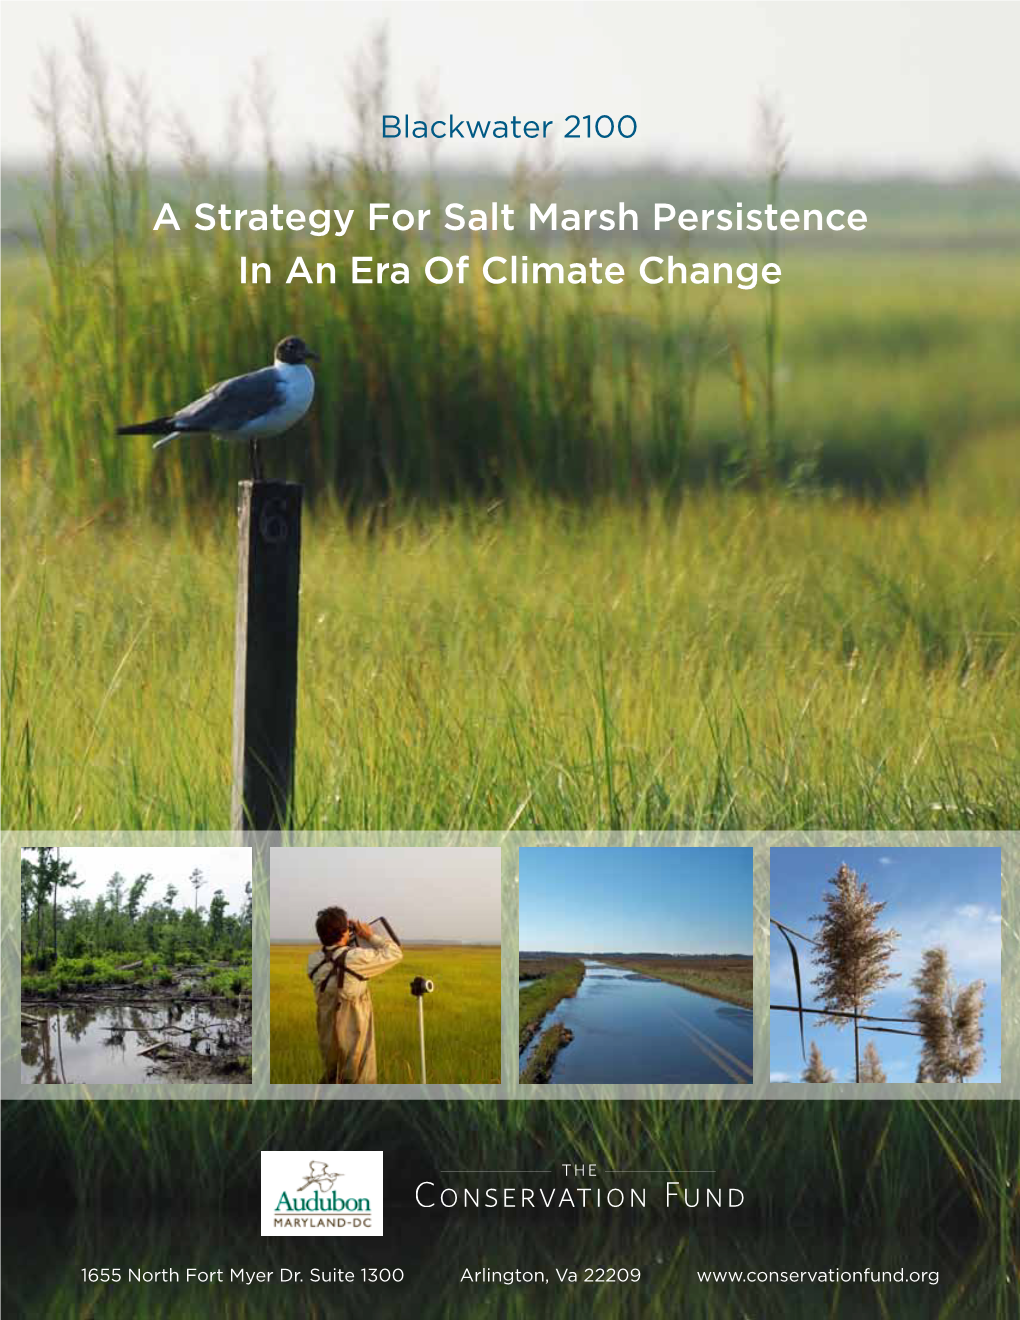 Blackwater 2100: a Strategy for Salt Marsh Persistence in an Era of Climate Change, 2013, the Conservation Fund (Arlington, VA) and Audubon MD-DC (Baltimore, MD)